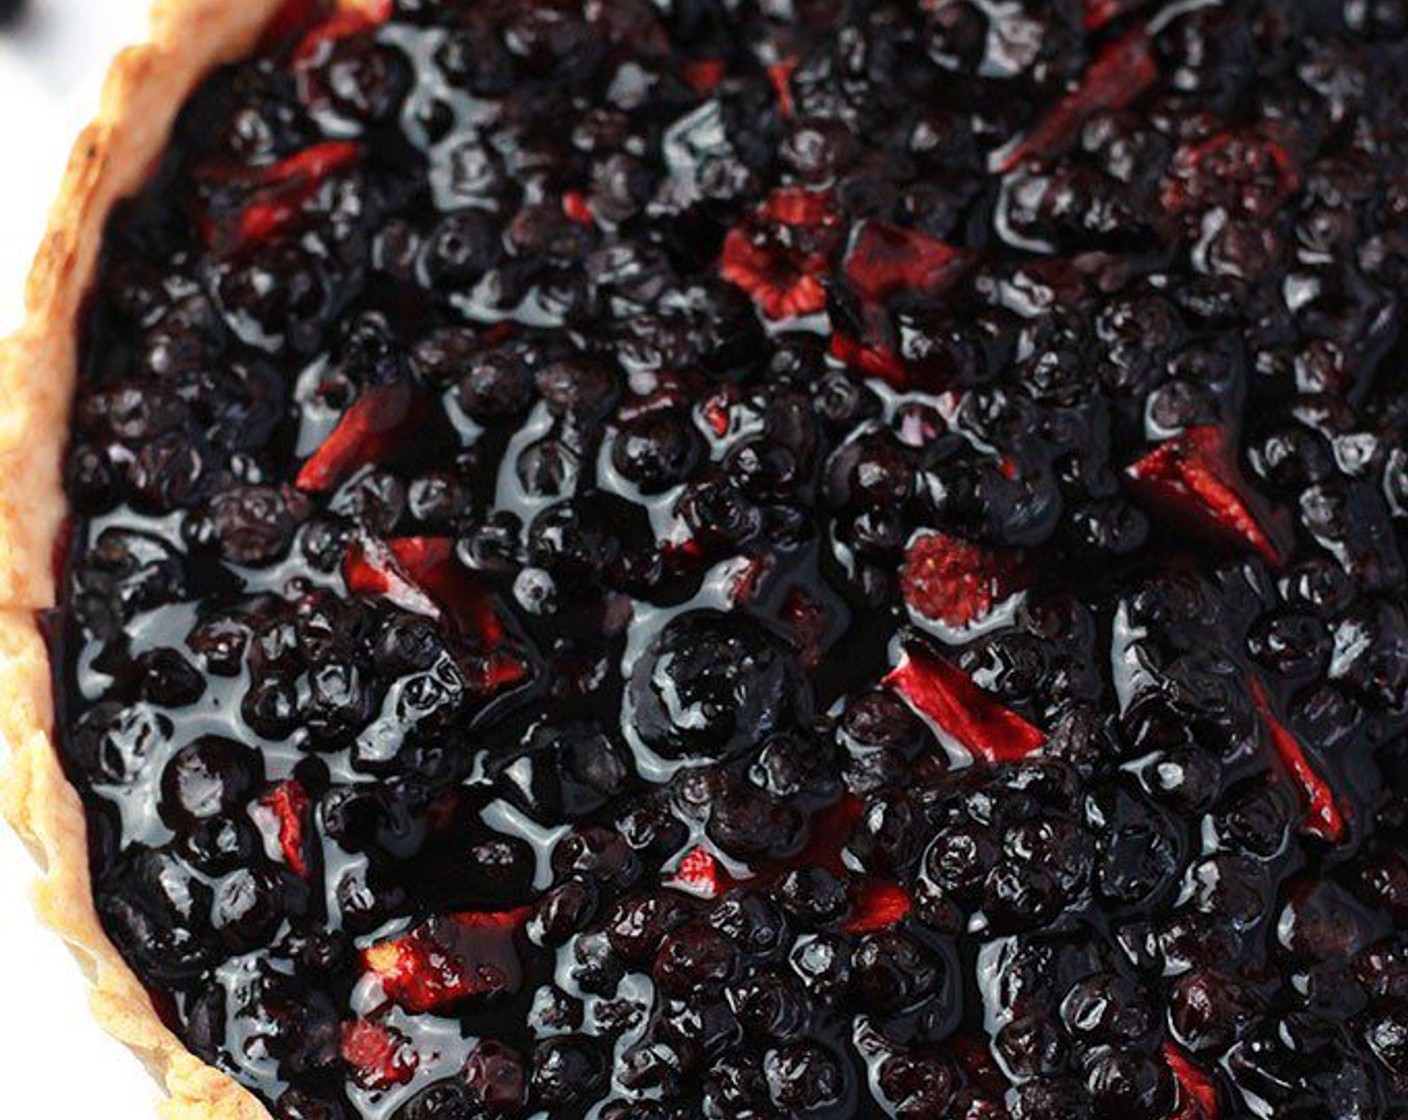 step 11 Allow tart to cool slightly before spreading the top with Wild Blueberry Sauce. When ready, simply slice and serve as is or serve with frozen yogurt, ice cream or a dollop of whipped topping. Enjoy!